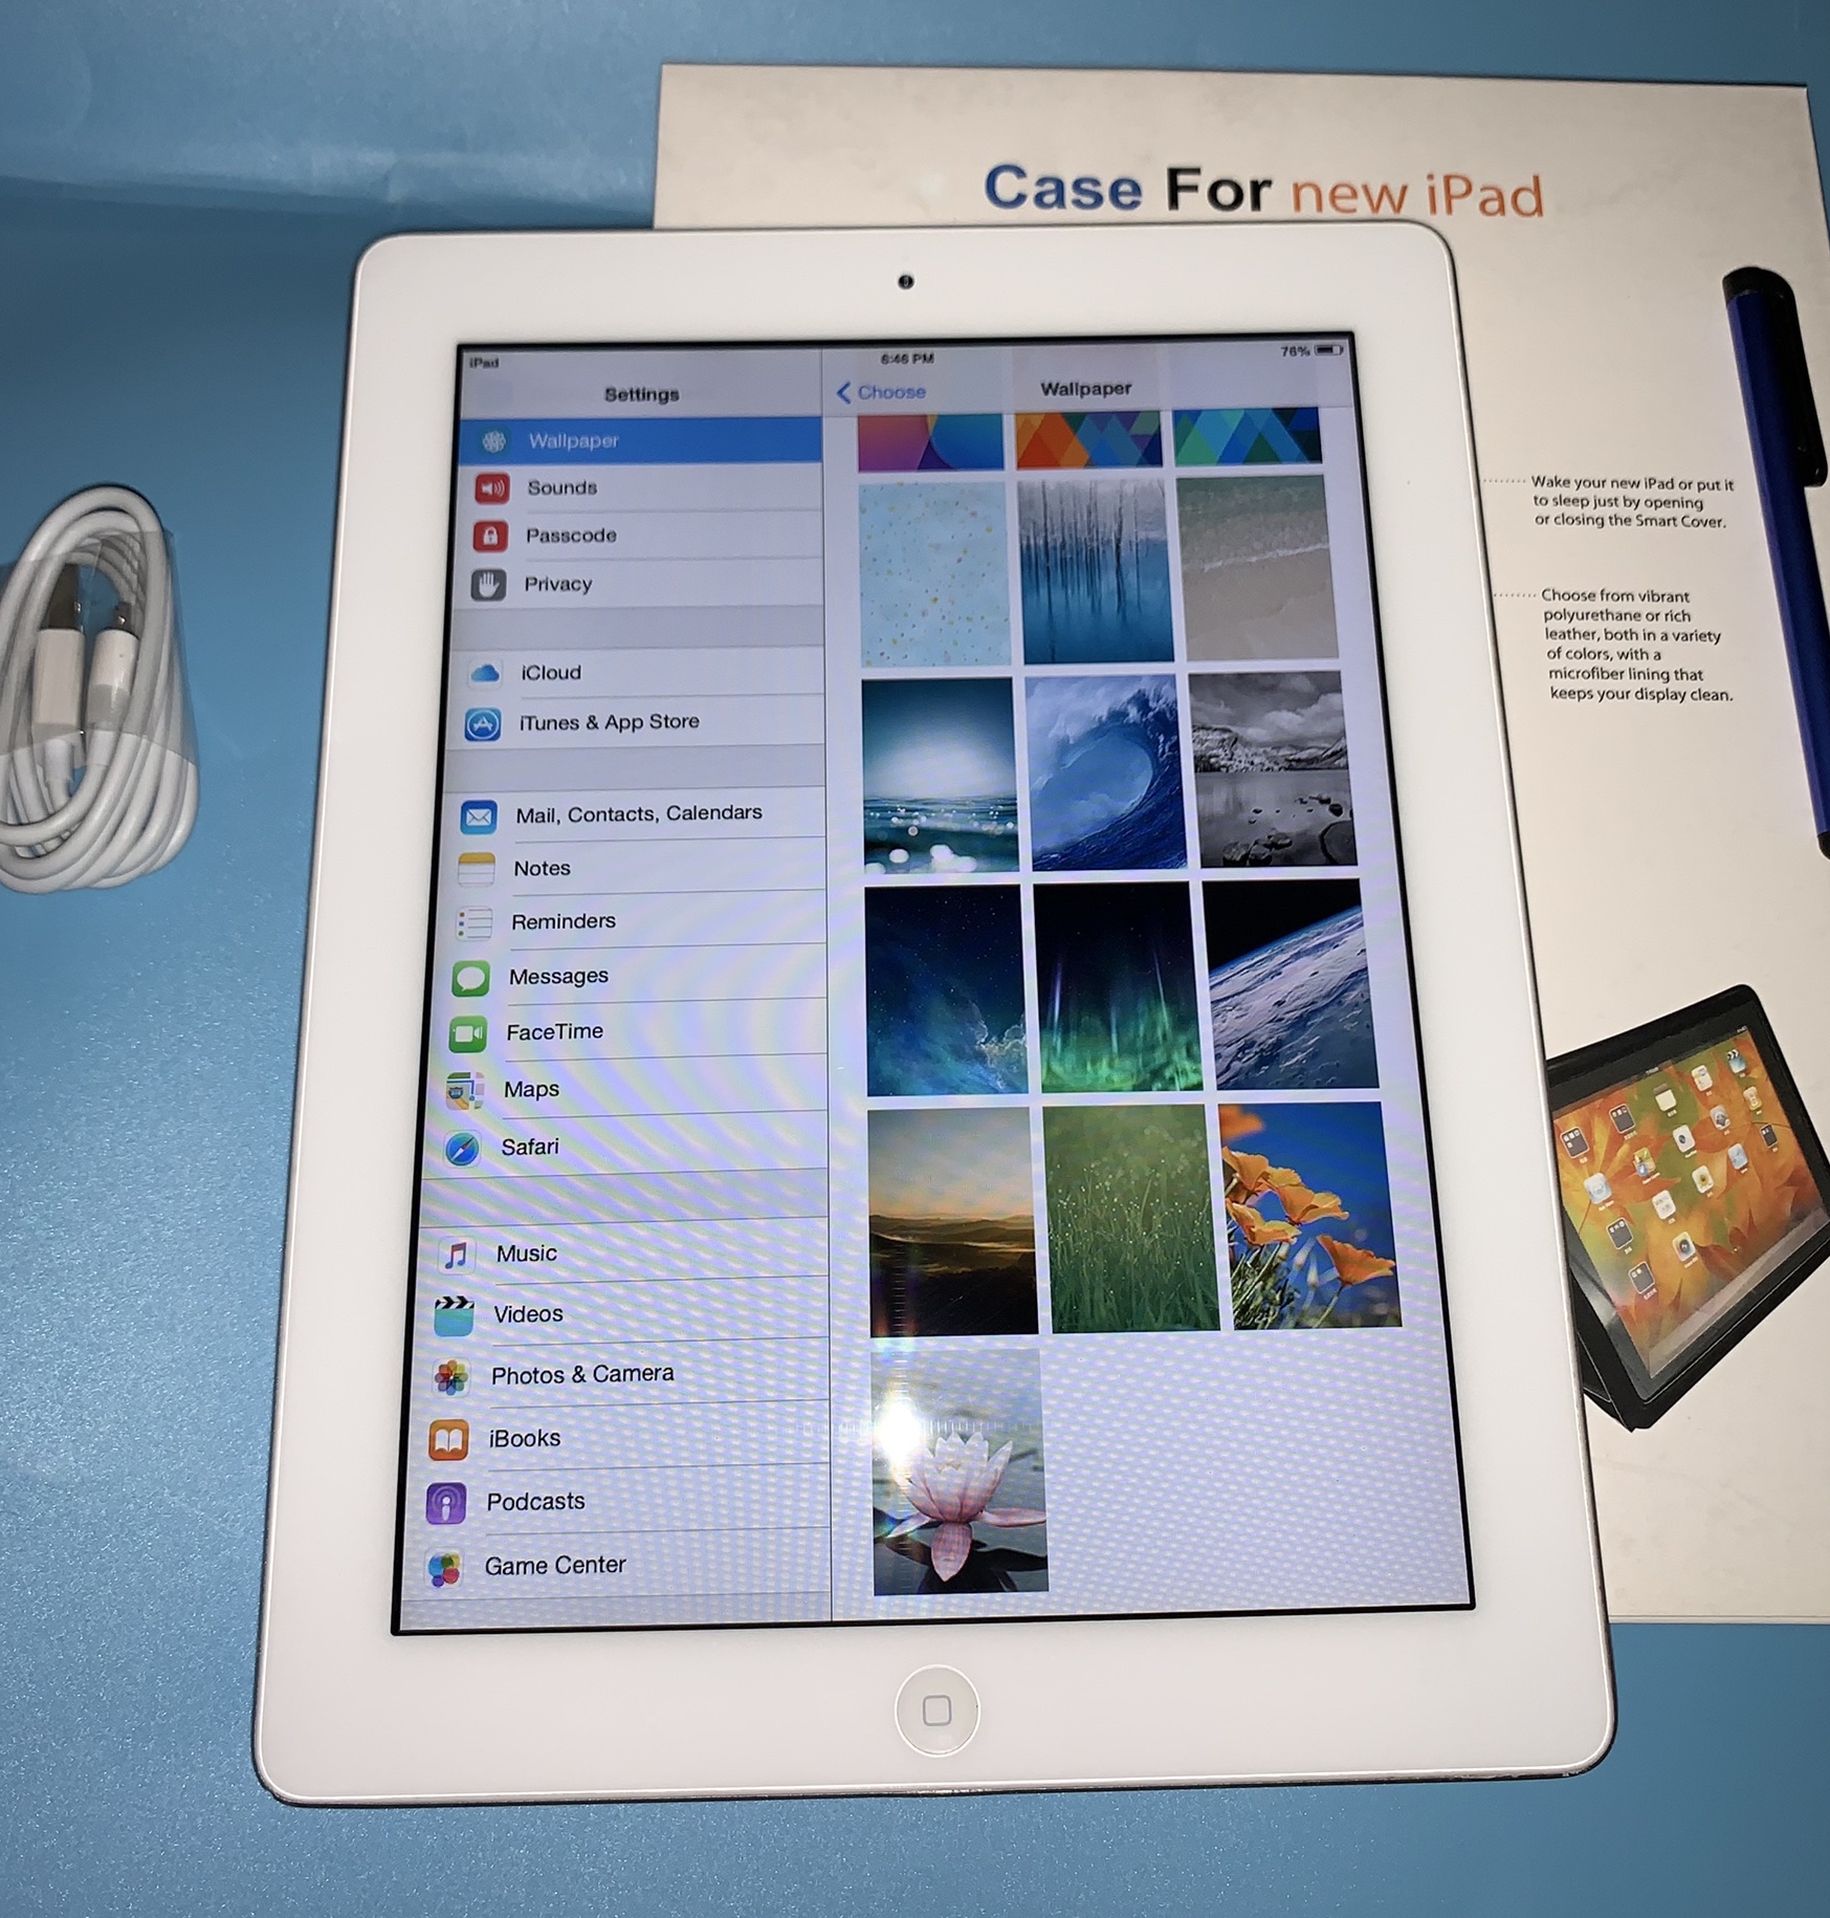 Apple iPad 2 With new Case And New Accessories 9.3.5 Ios